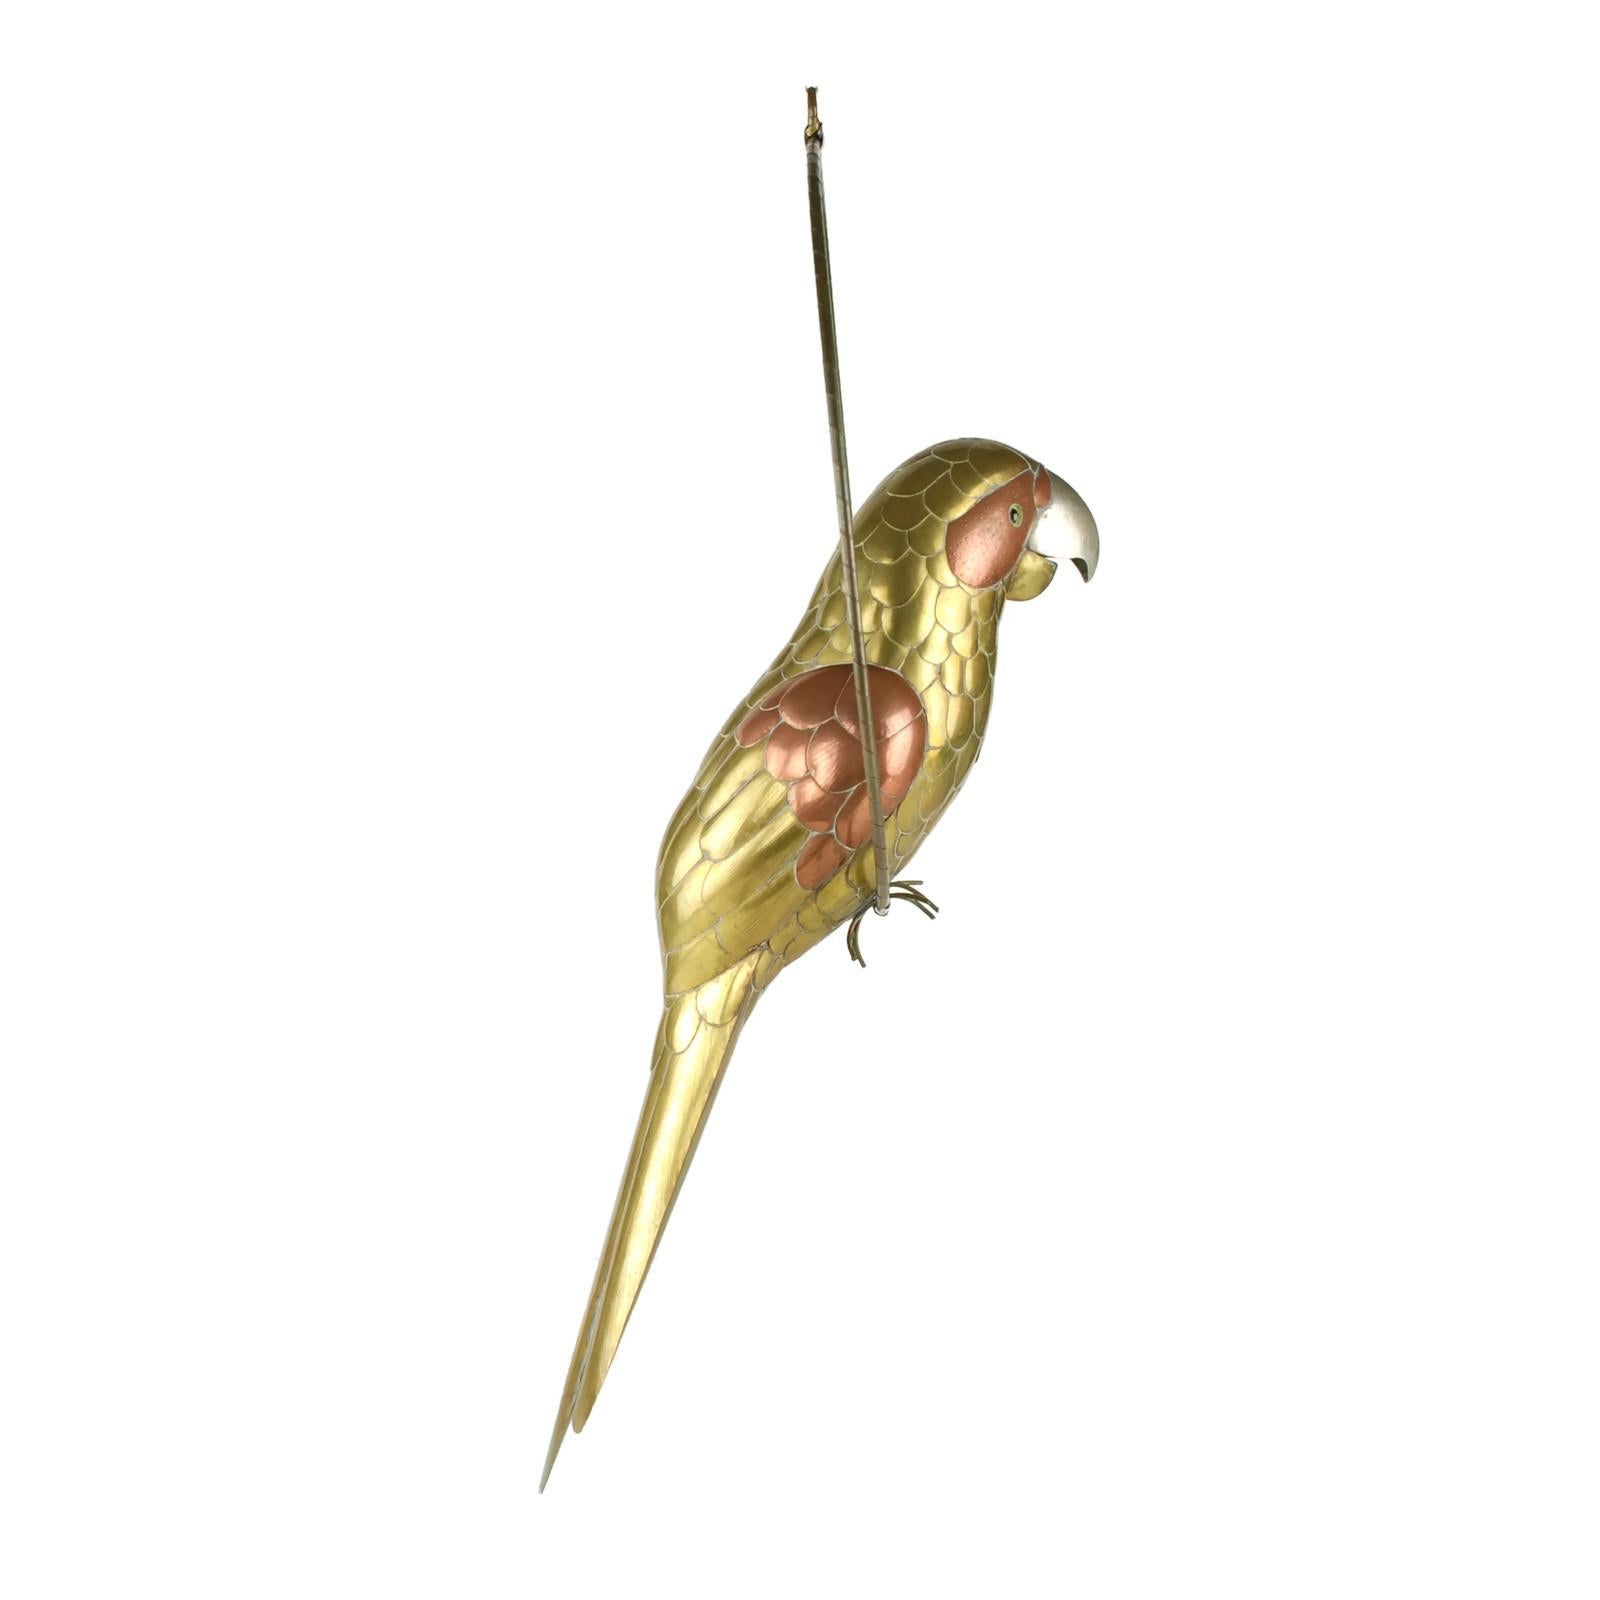 This large mixed metal figural parrot was designed by highly regarded Mexican sculptor Sergio Bustamante. The hand crafted bird is composed of brass, copper and steel and features glass eyes. The parrot has been posed as if clutching a large